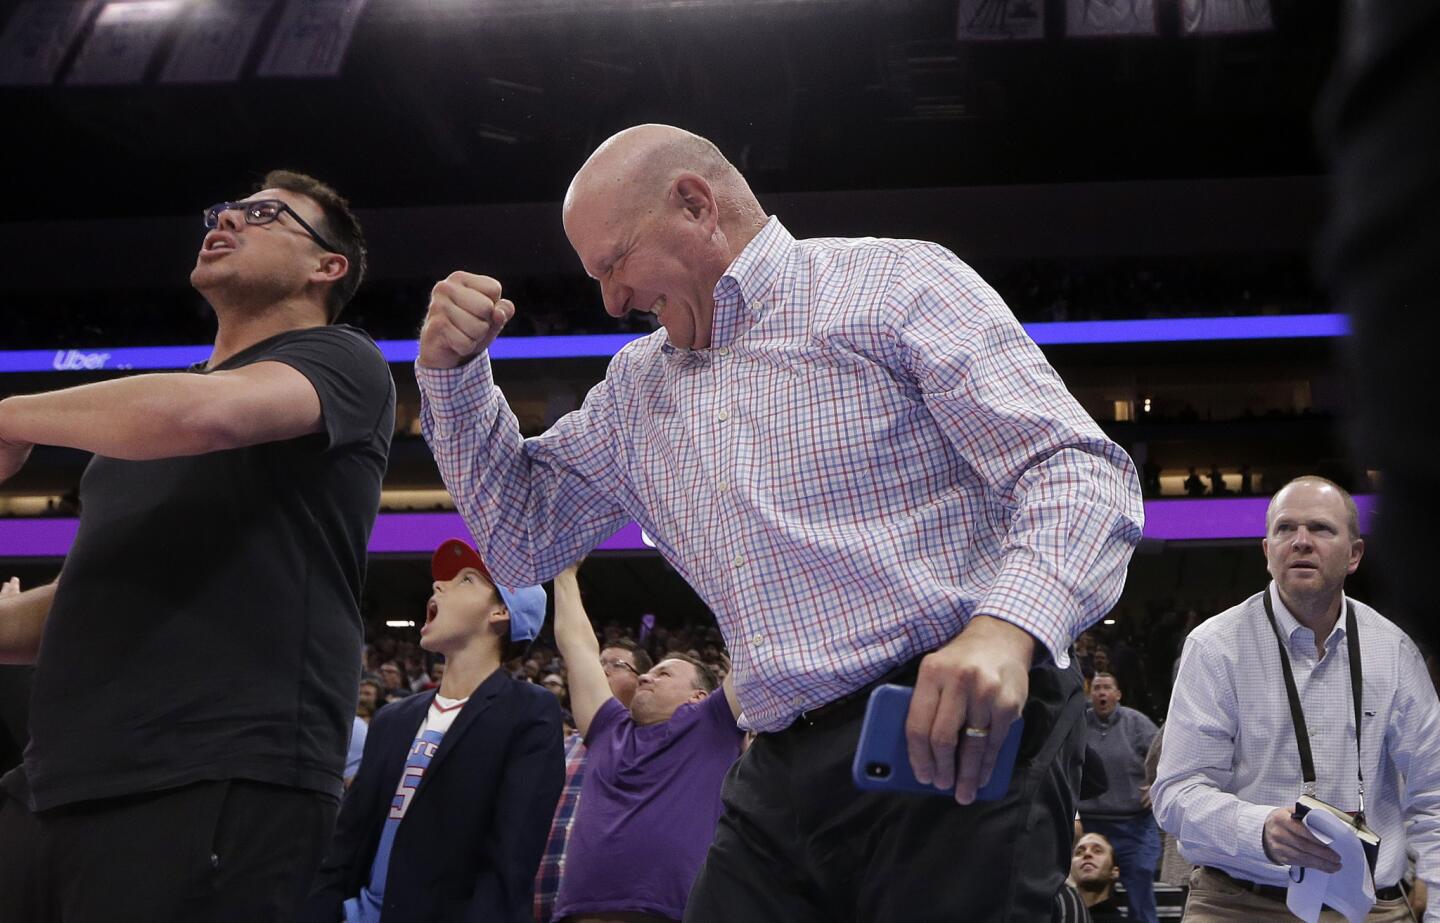 Los Angeles Clippers owner Steve Ballmer, center, celebrates in the closing moments of the Clippers 116-109 win over the Sacramento Kings in an NBA basketball game in Sacramento, Calif., Friday, March 1, 2019. (AP Photo/Rich Pedroncelli)